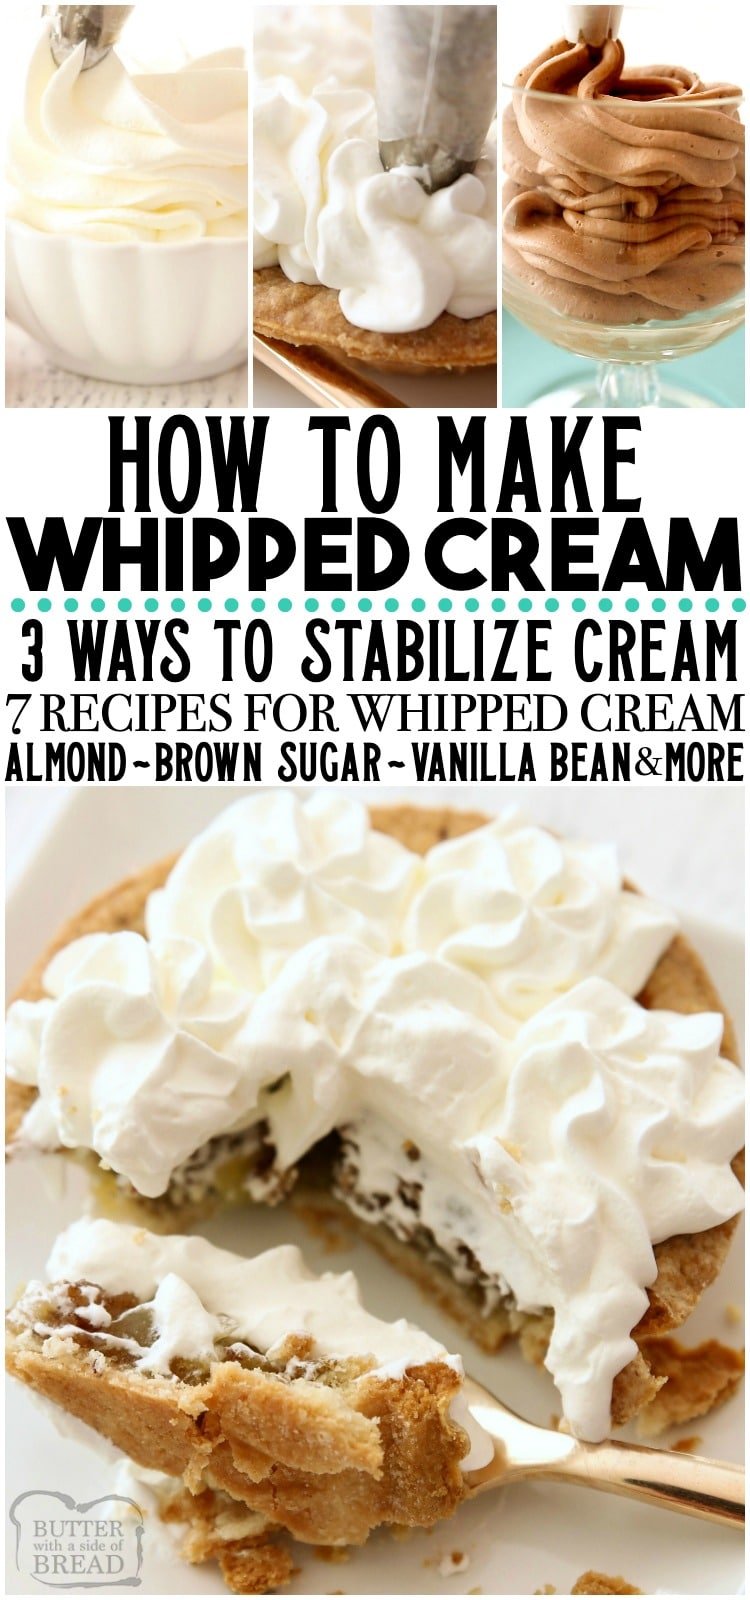 Simple instructions showing how to make whipped cream! 3 methods for Stabilized Whipped Cream & 4 different recipes for the BEST Homemade Whipped Cream. #whippedCream #howtomakewhippedcream #whippingcream #recipe #dessert #pie from BUTTER WITH A SIDE OF BREAD